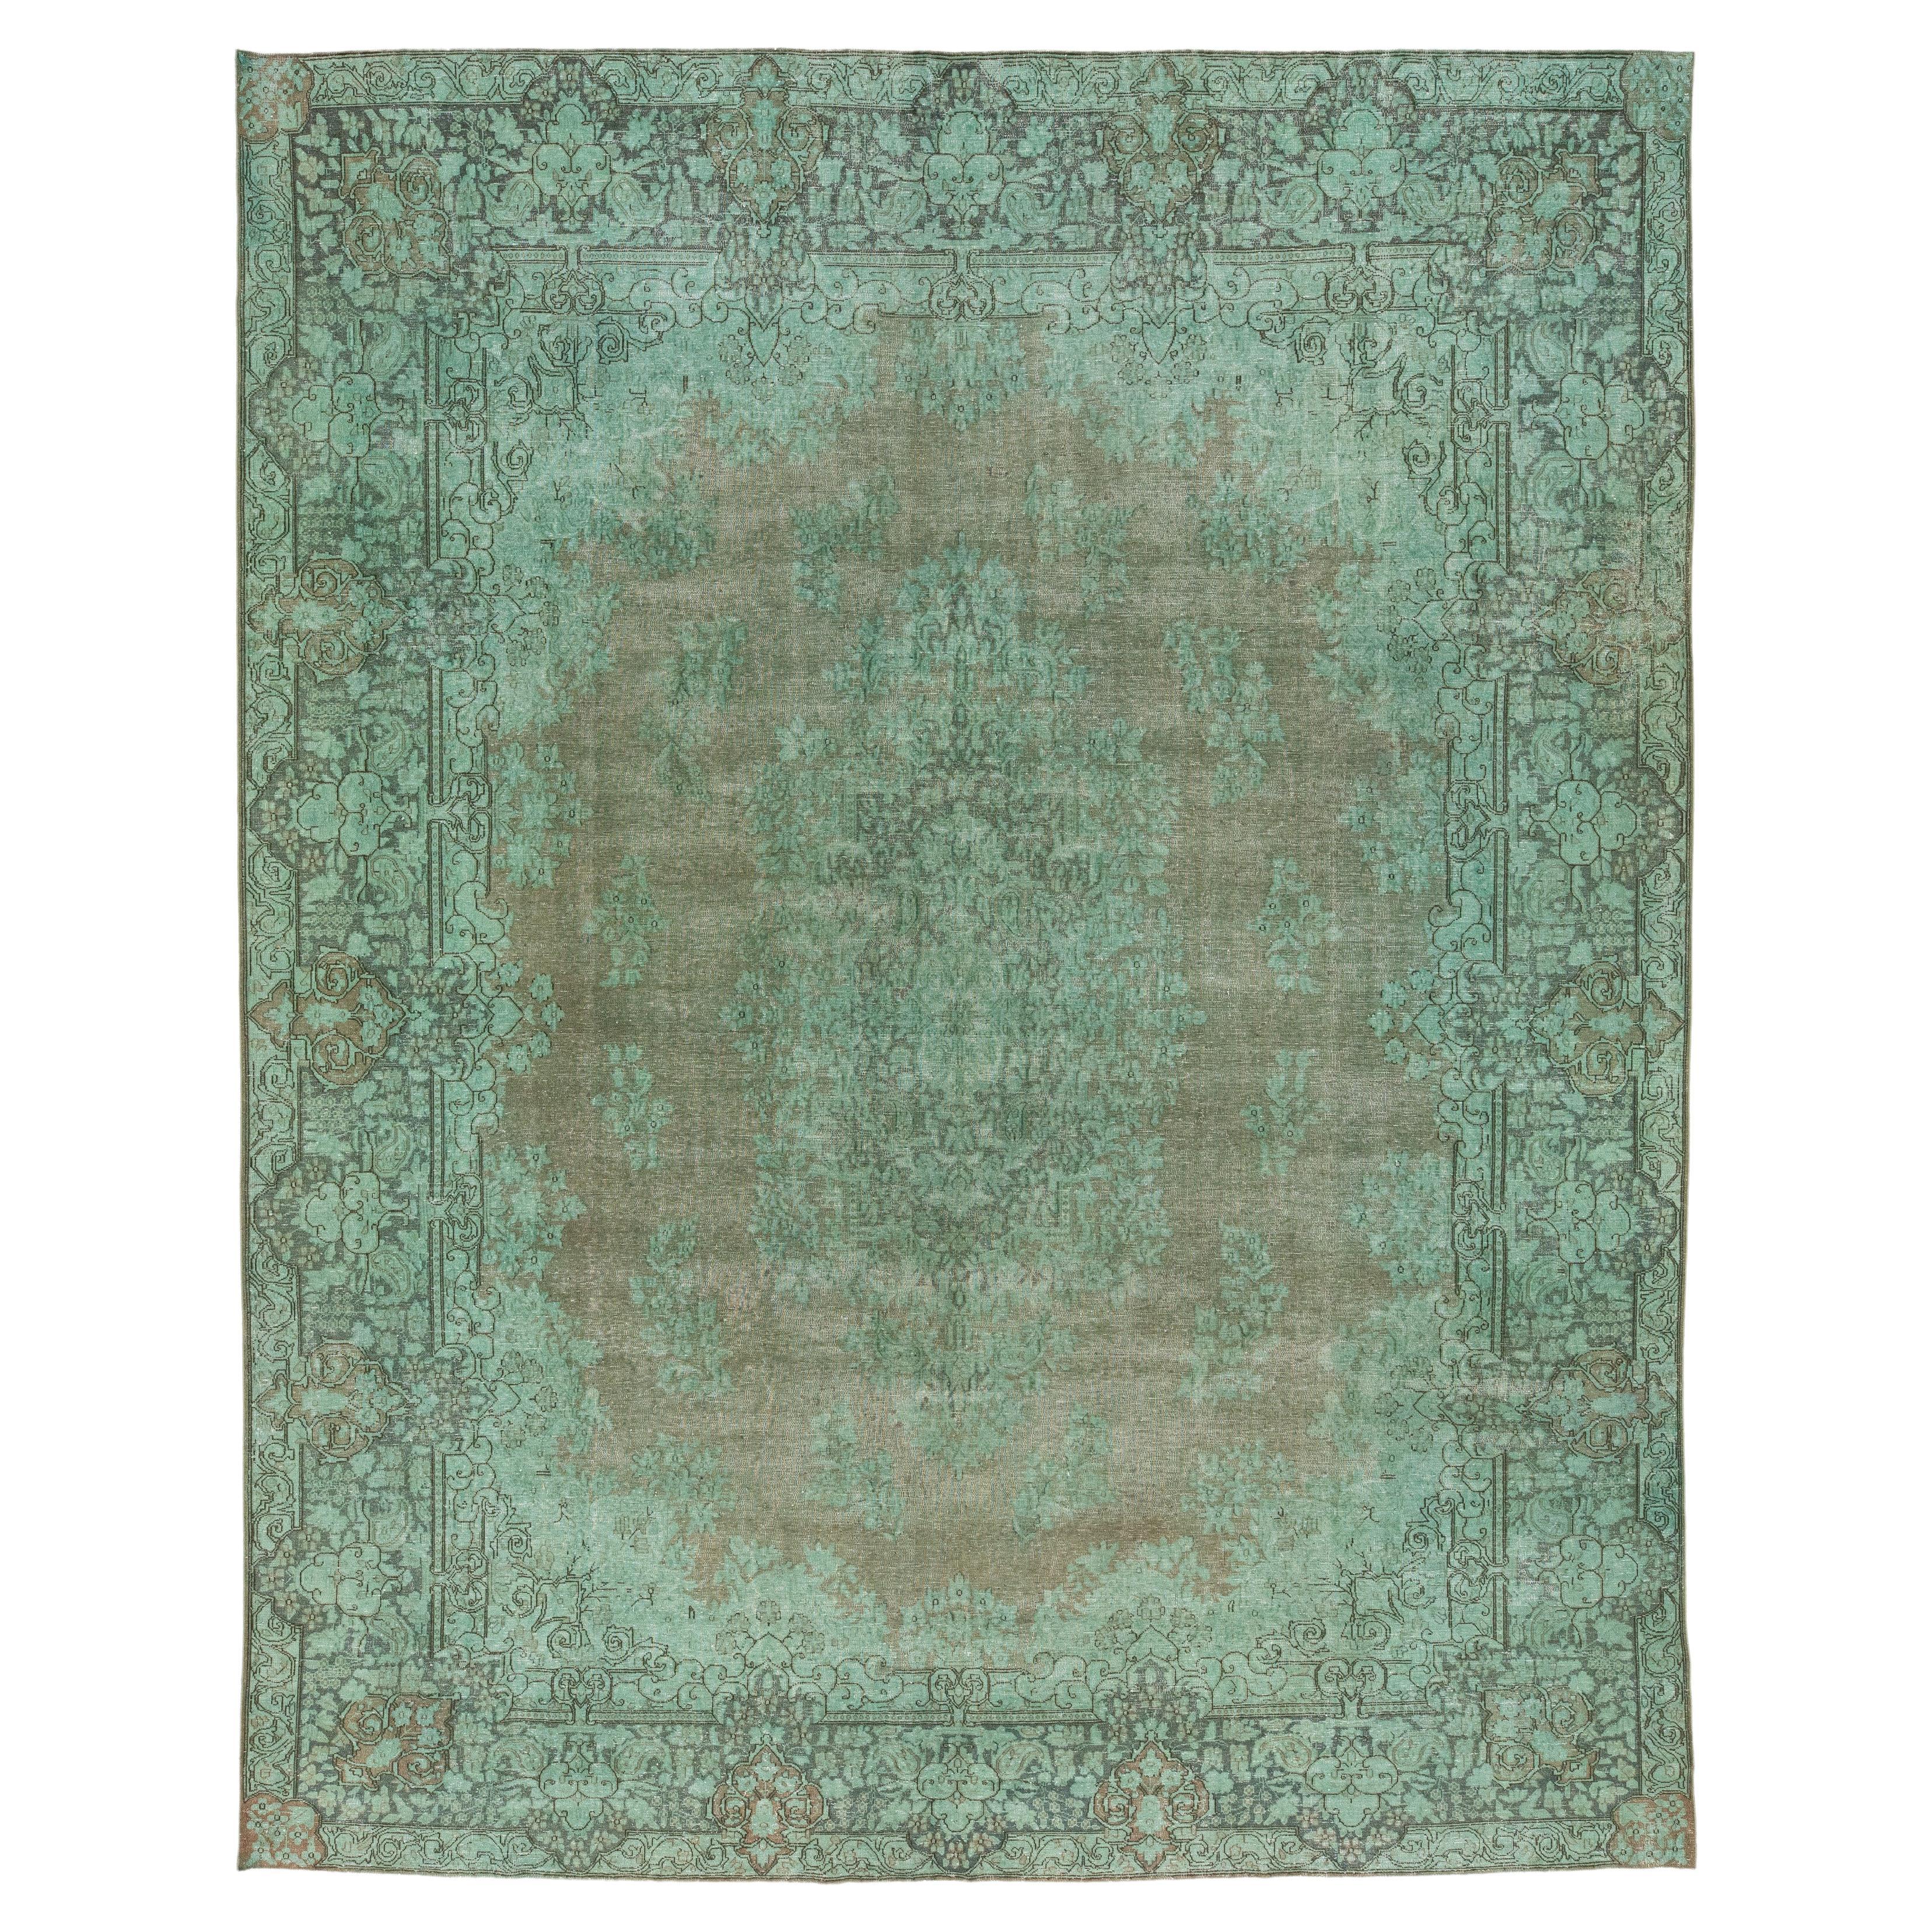 Green Floral Antique Persian Overdyed Wool Rug 10 x 13